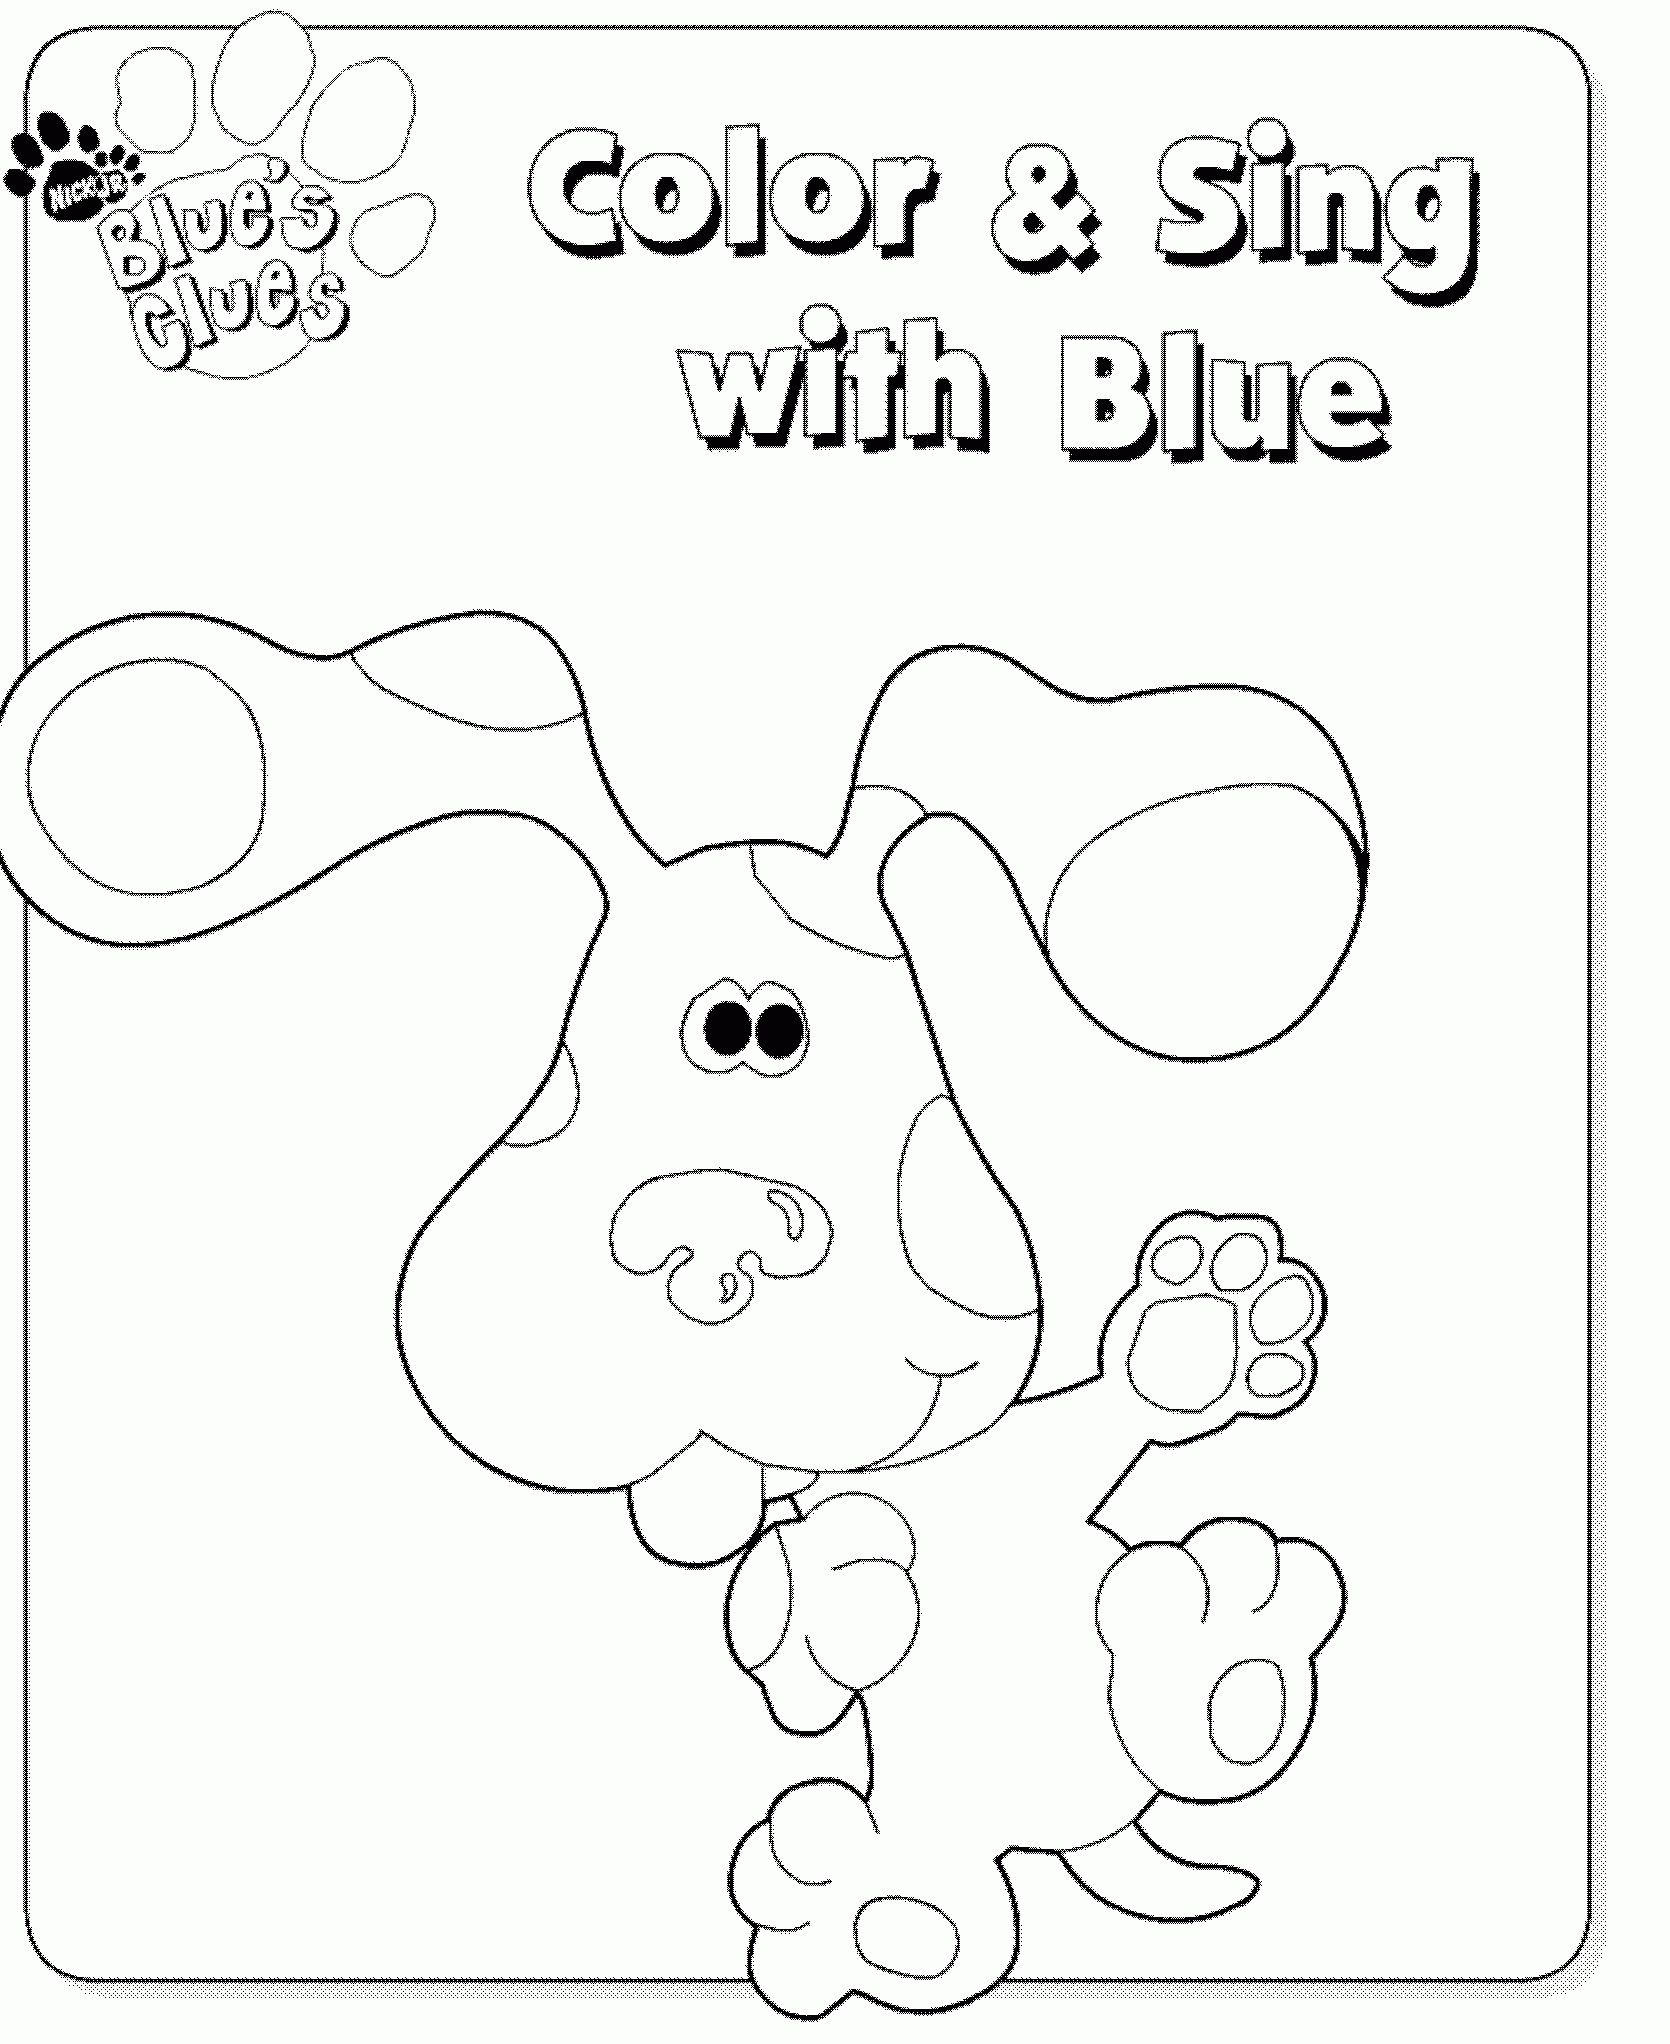 Kids-n-fun.com | 15 coloring pages of Blues Clues